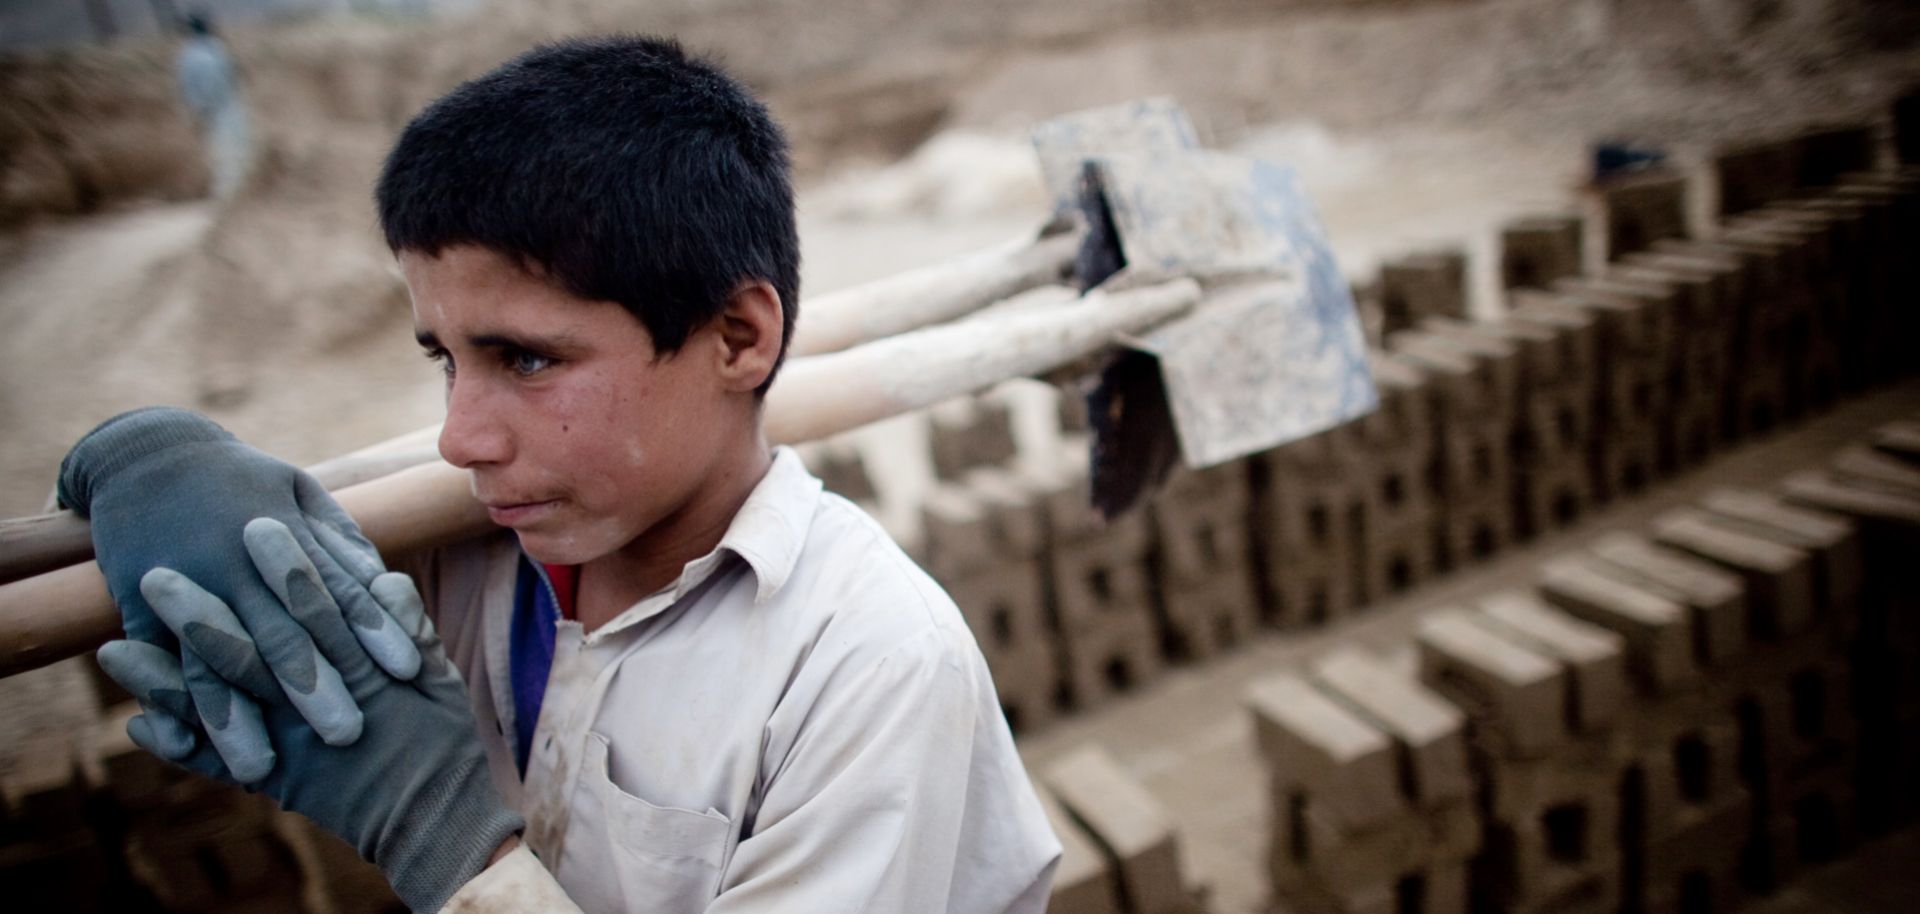 An Afghan child carries shovels at a brick factory in Kabul. The percentage of the world's population in slavery may be at its lowest point in history, but in absolute terms, the global number of enslaved people is higher than it's ever been.